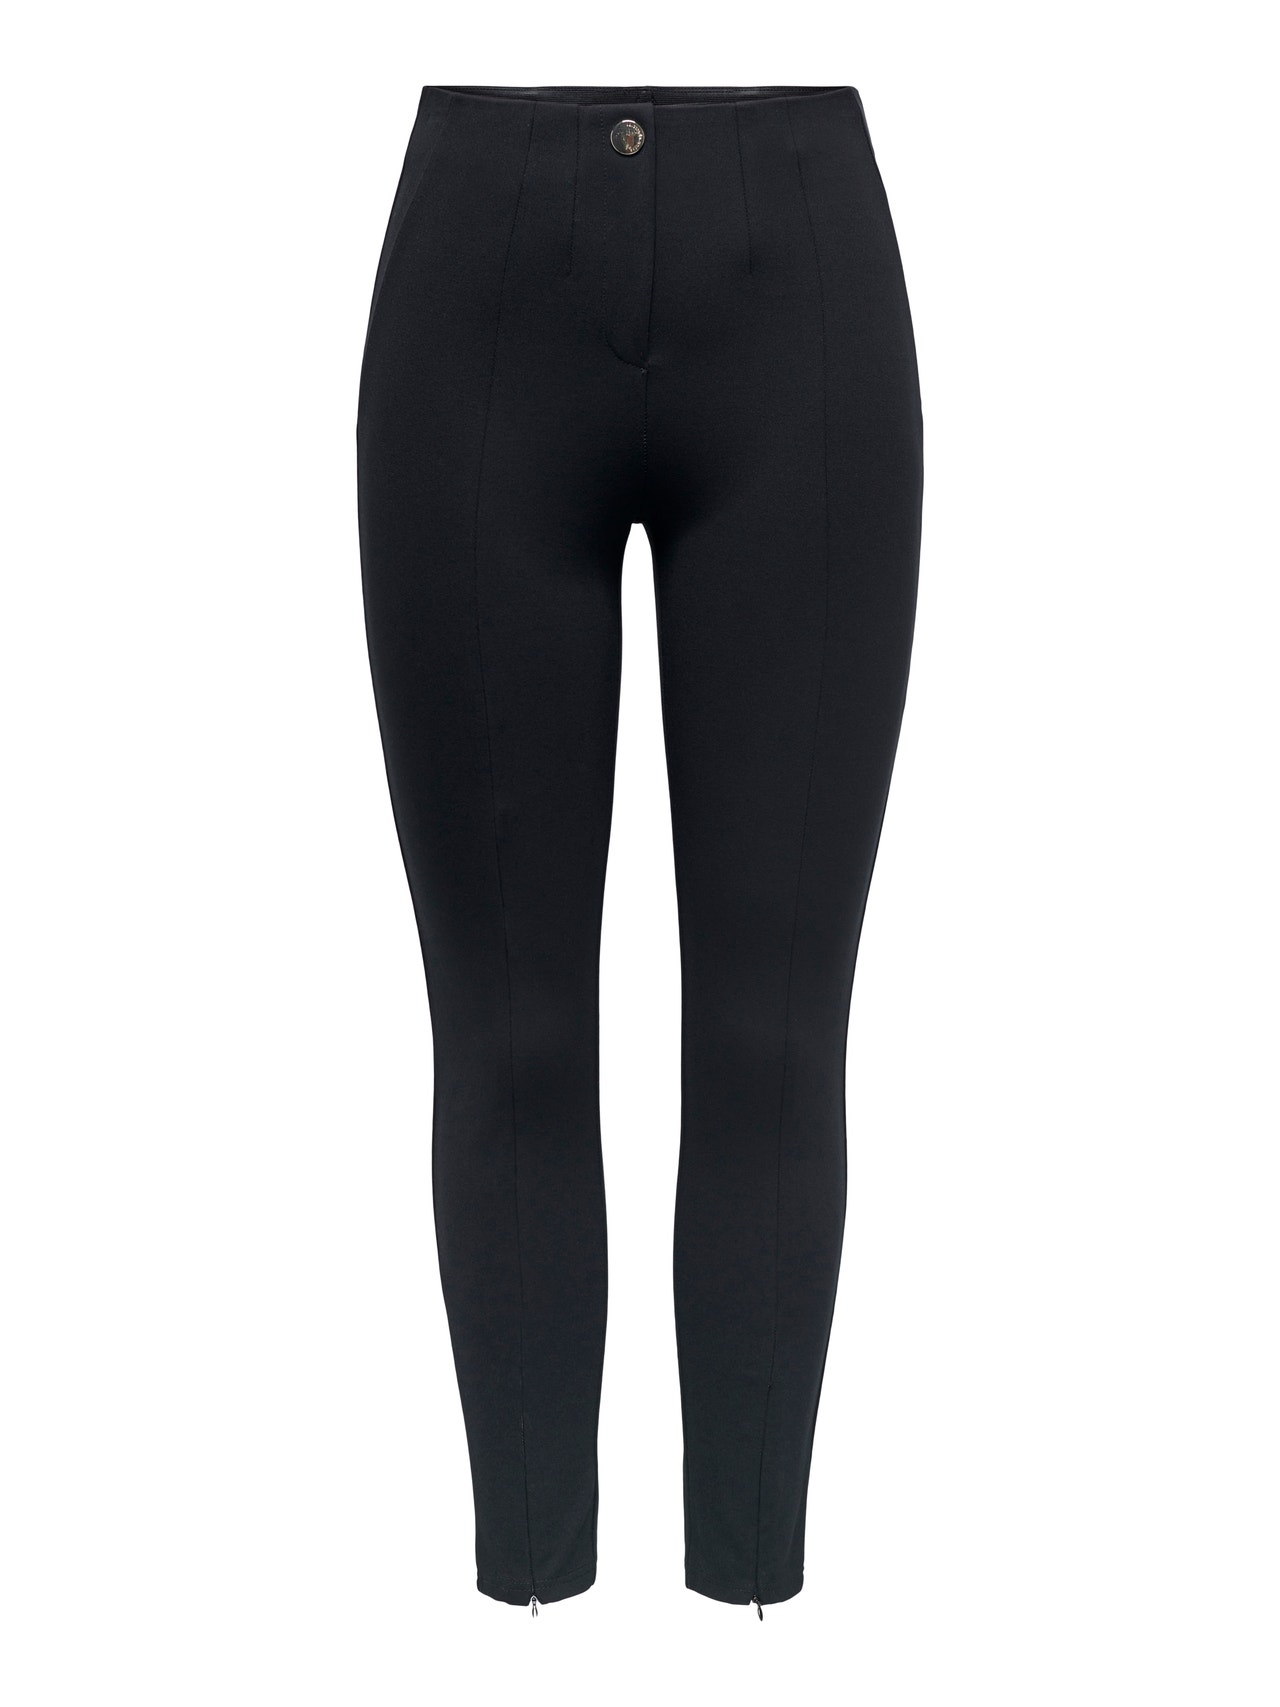 ONLY Solid colored Leggings -Black - 15275302